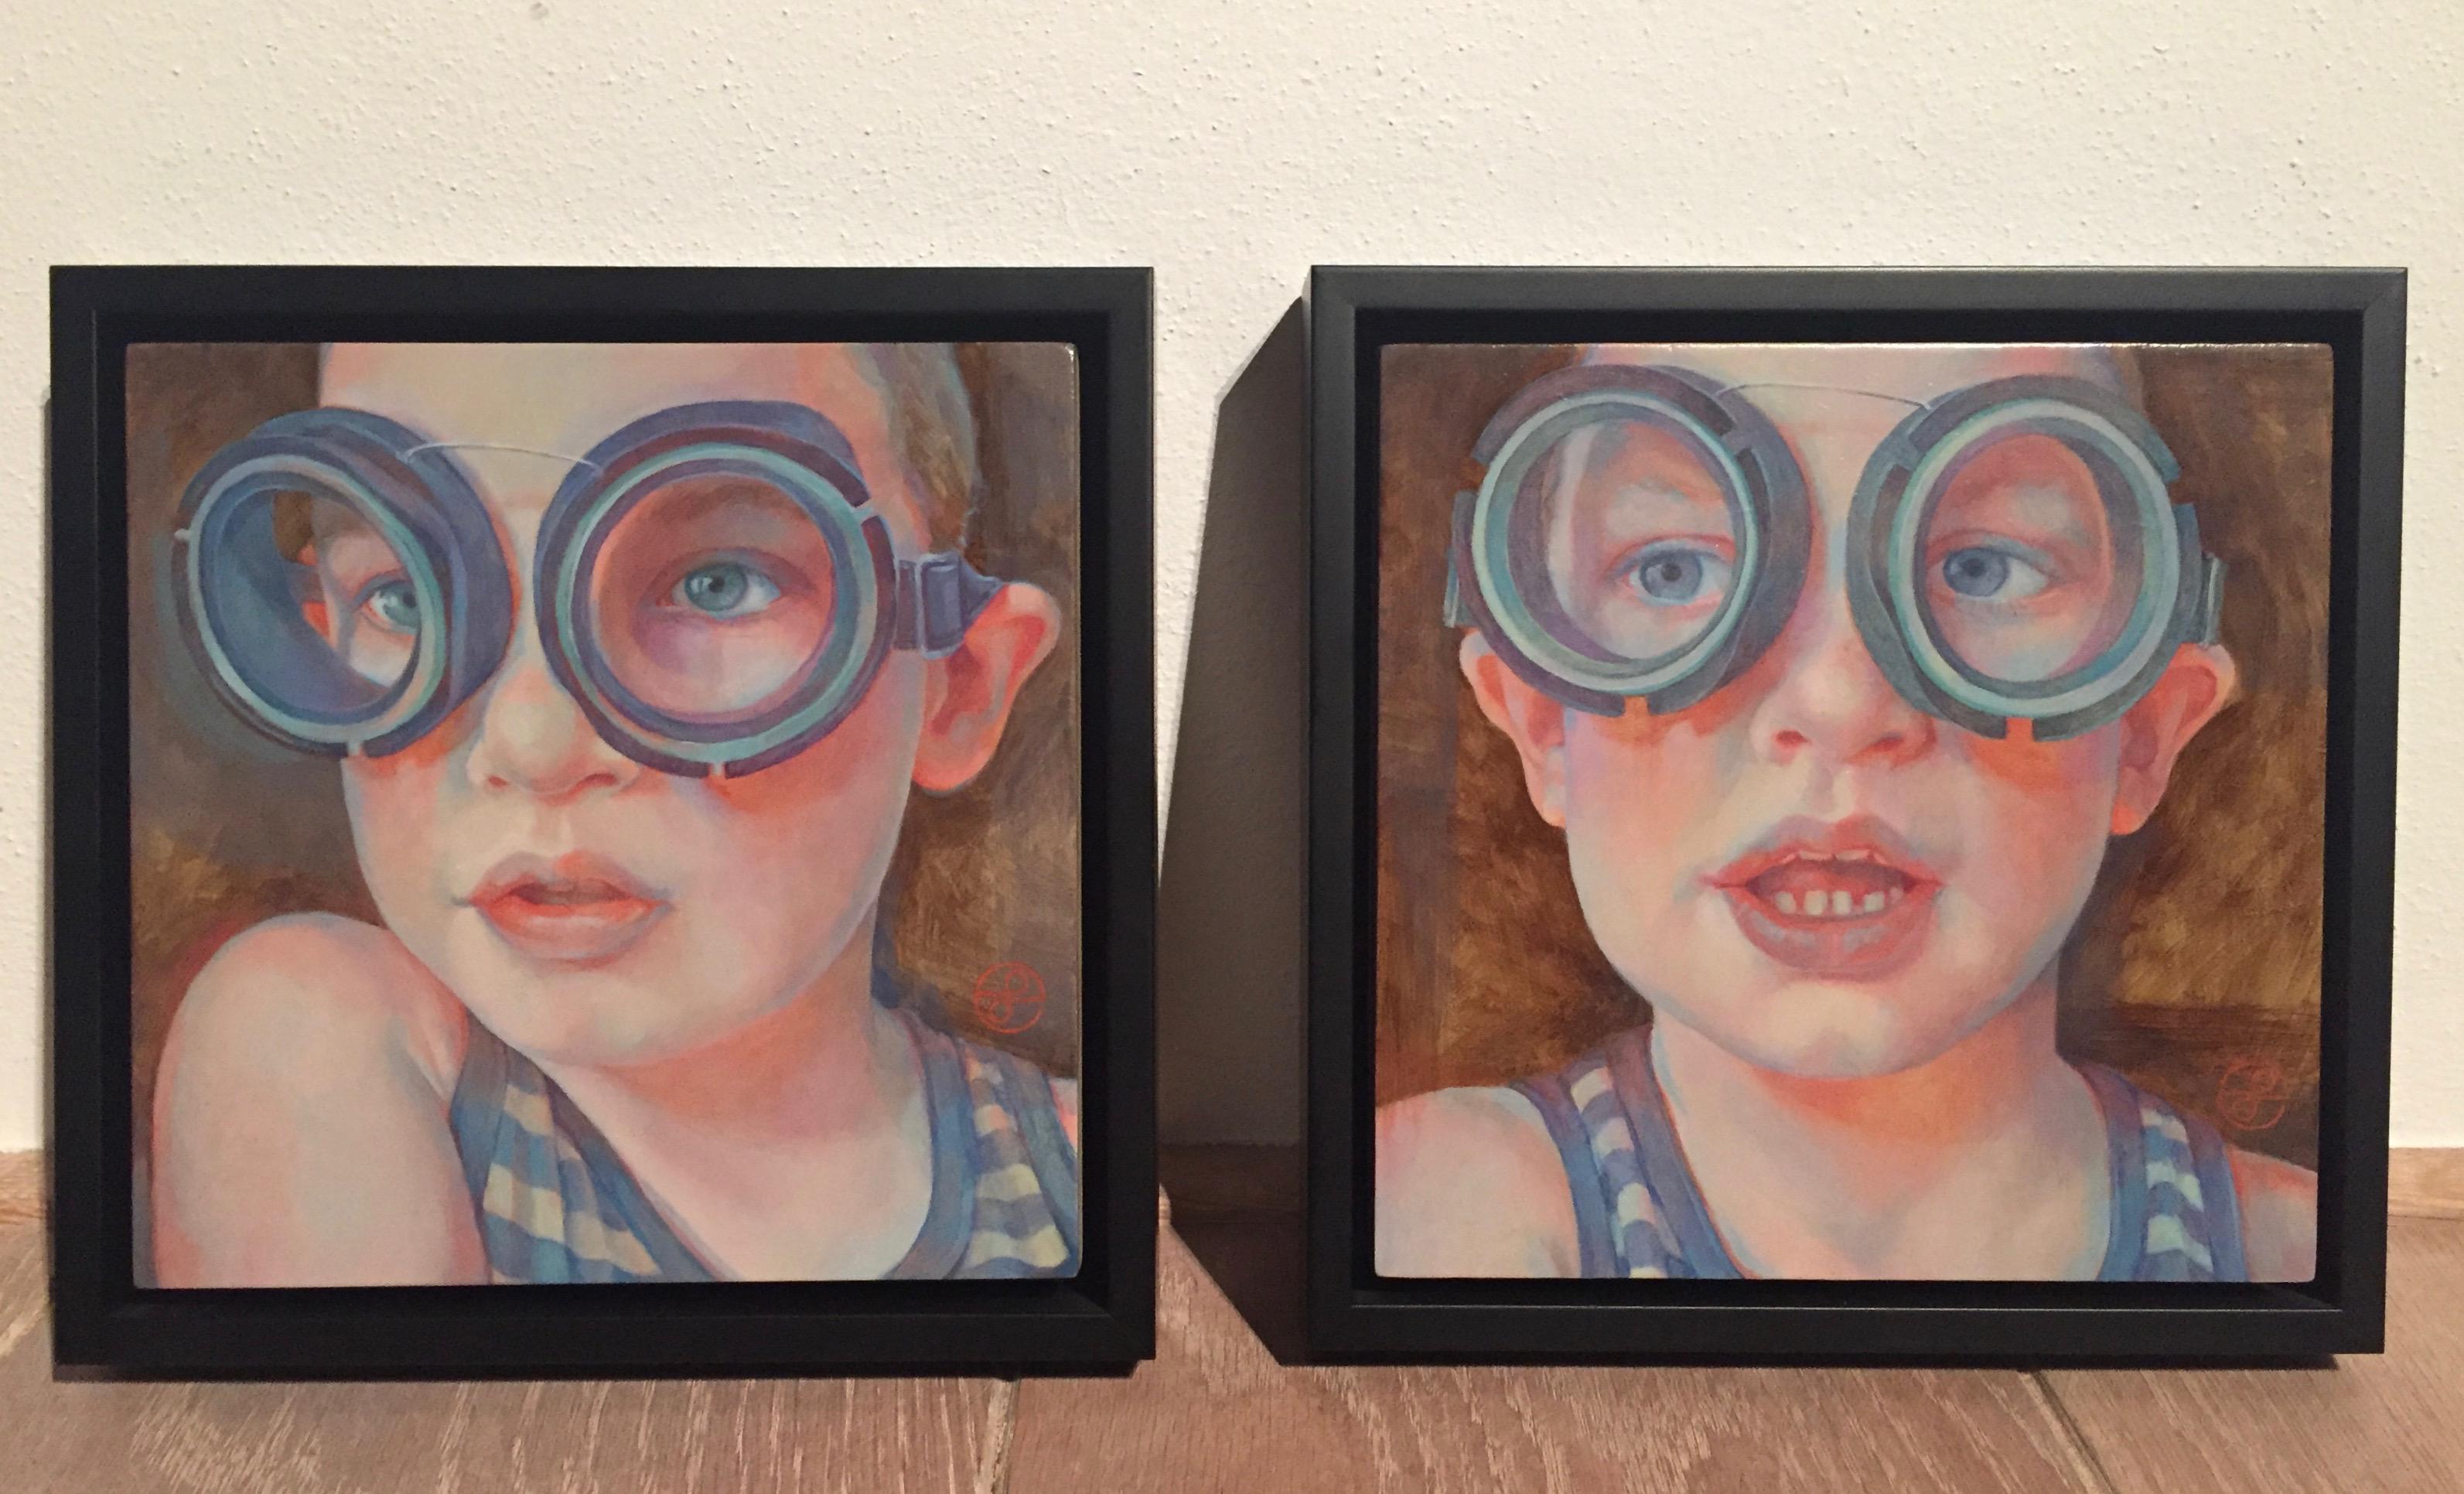 Diving Glasses I- 21st Century Contemporary Portrait Painting of a Boy 1